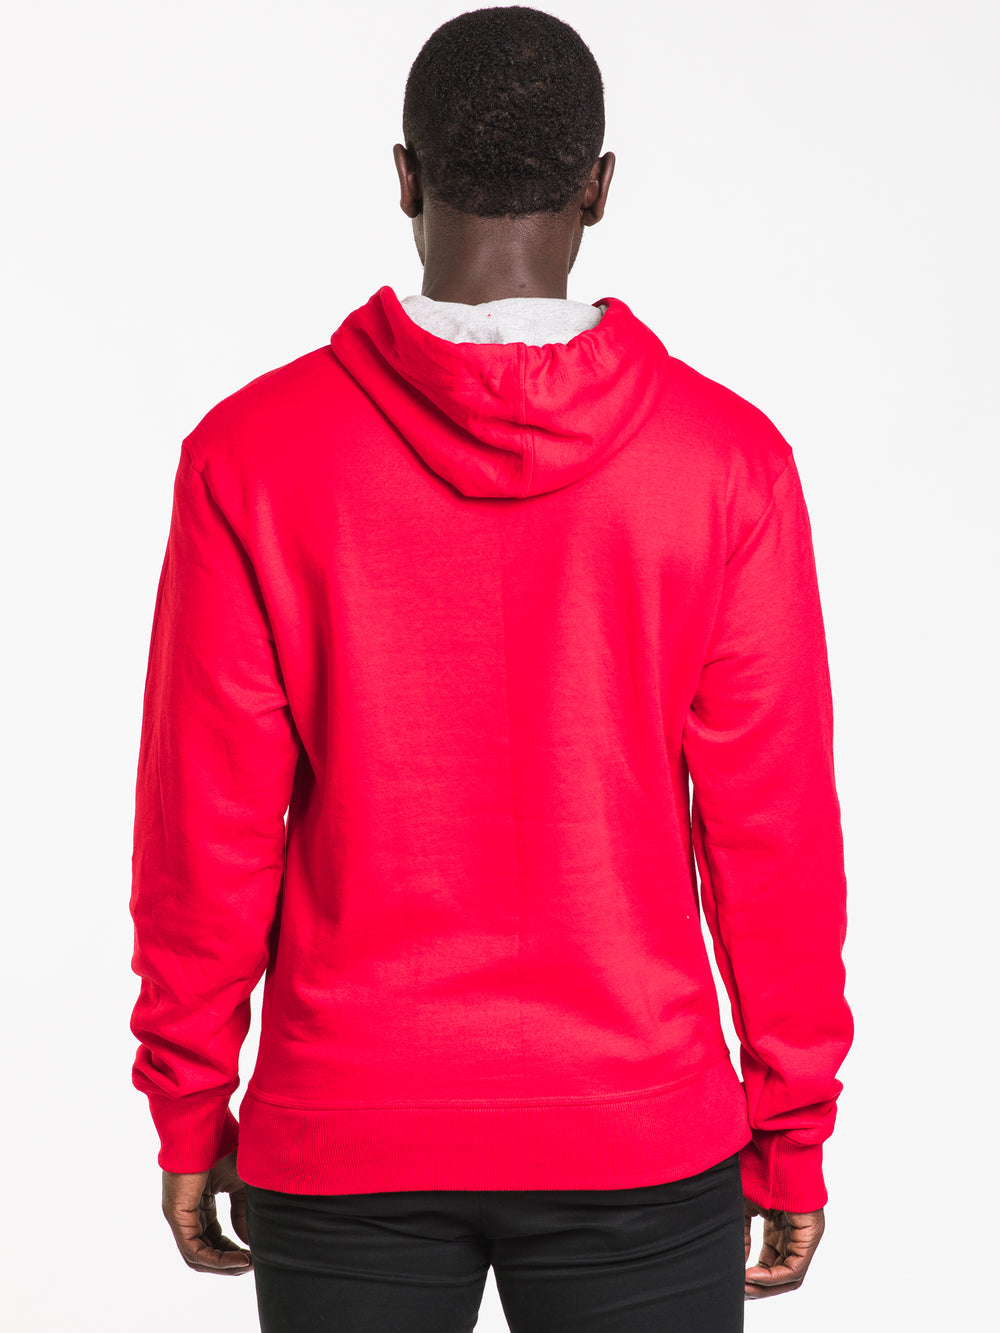 CHAMPION BEHIND SCRIPT PULLOVER HOODIE - CLEARANCE